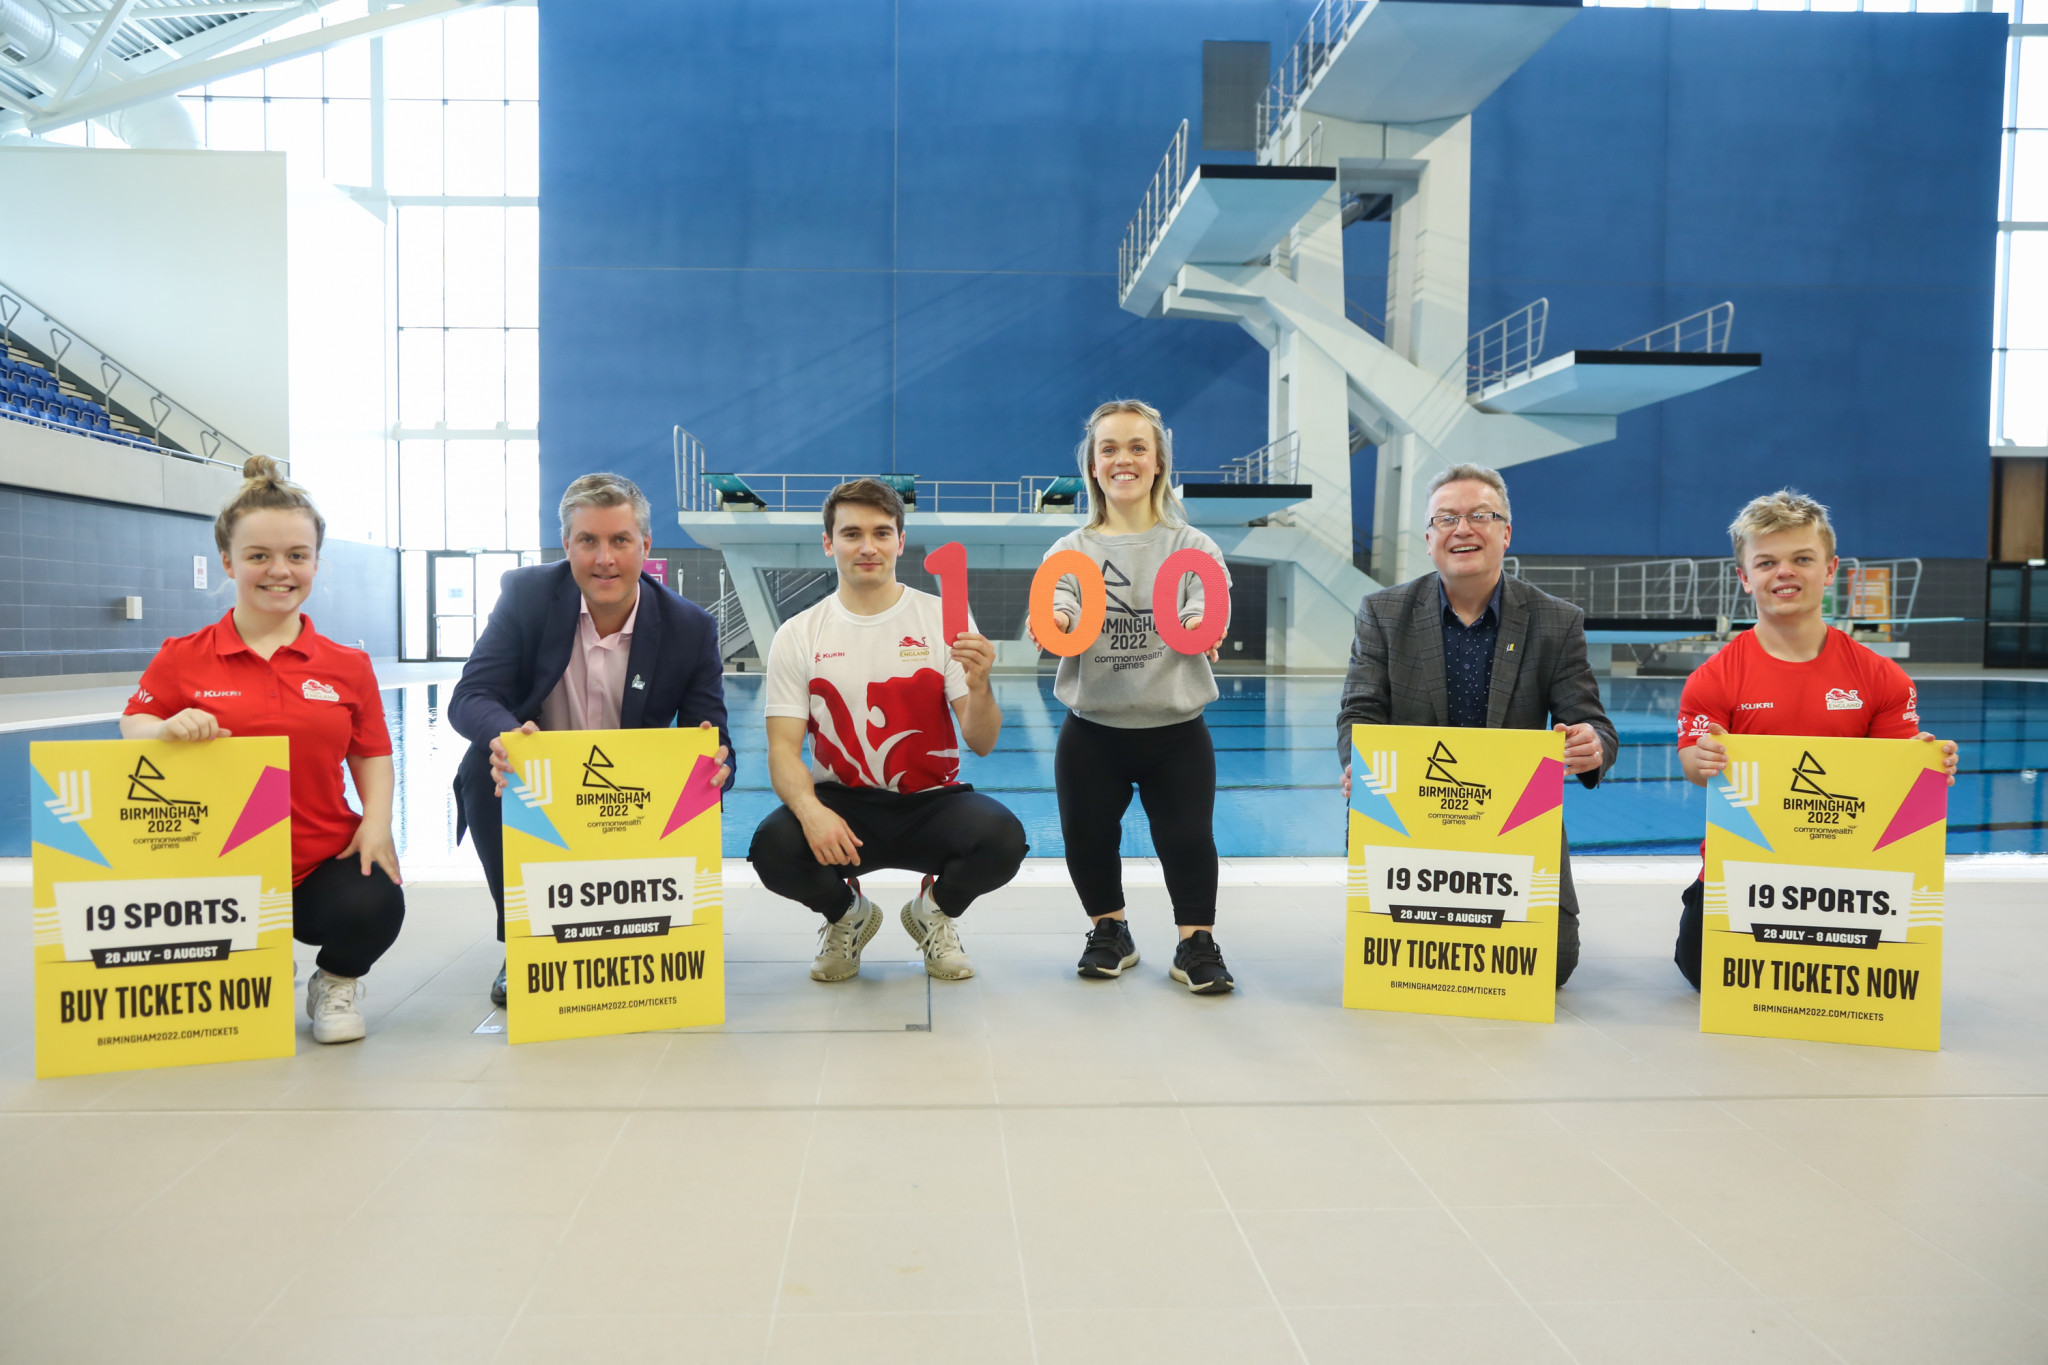 There are just 100 days to go until Birmingham stages the Commonwealth Games ©Birmingham 2022